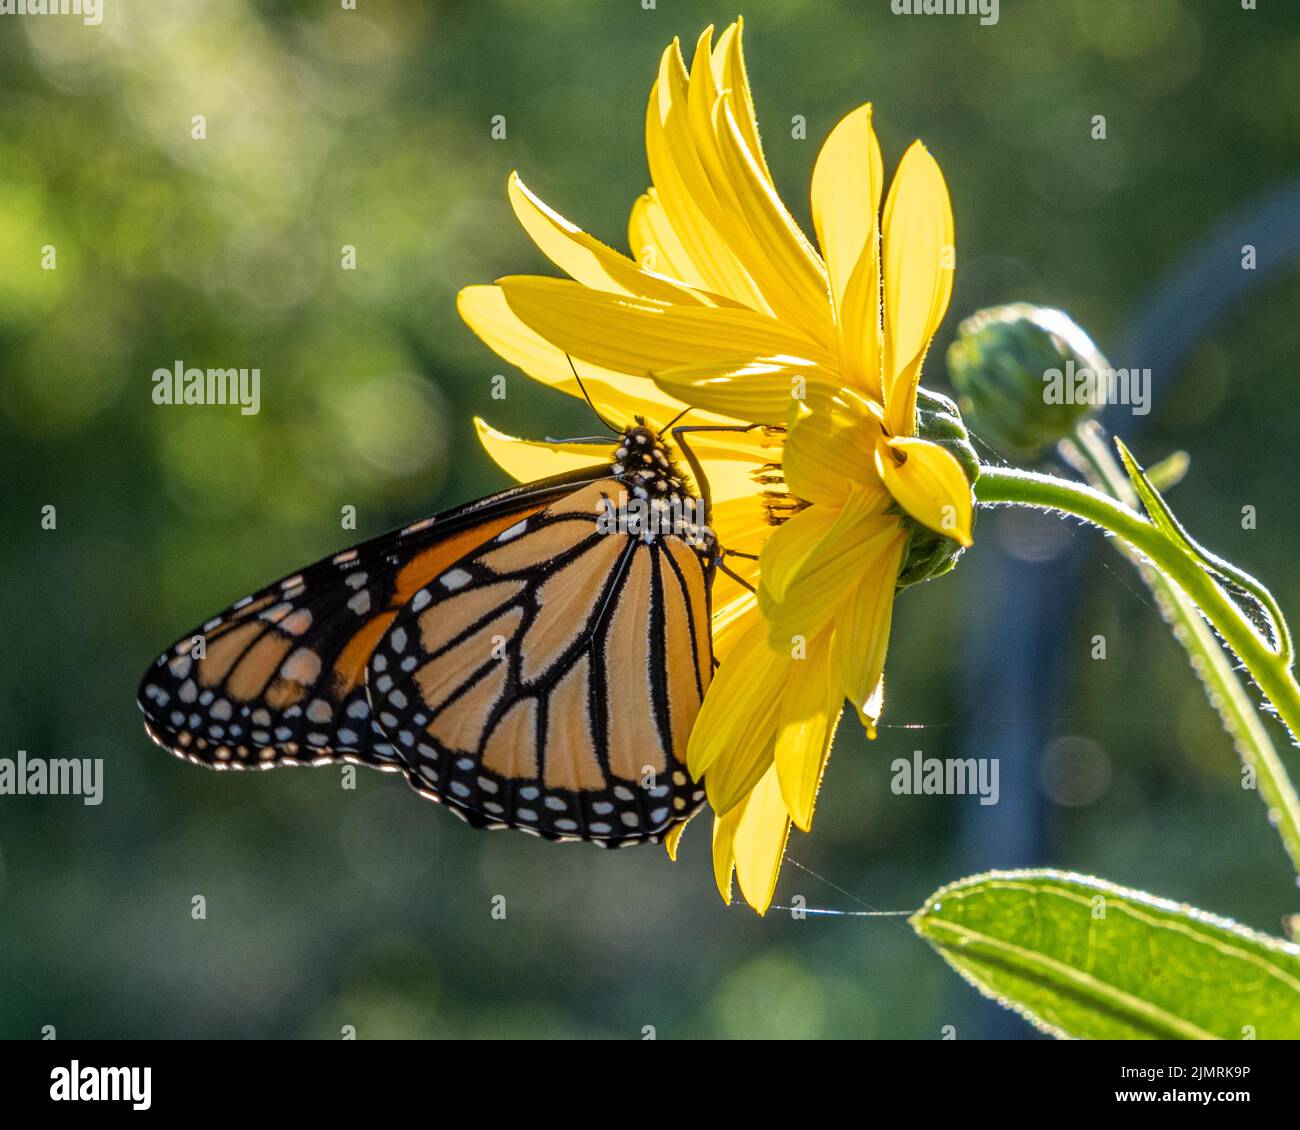 A monarch butterfly on a yellow daisy Stock Photo